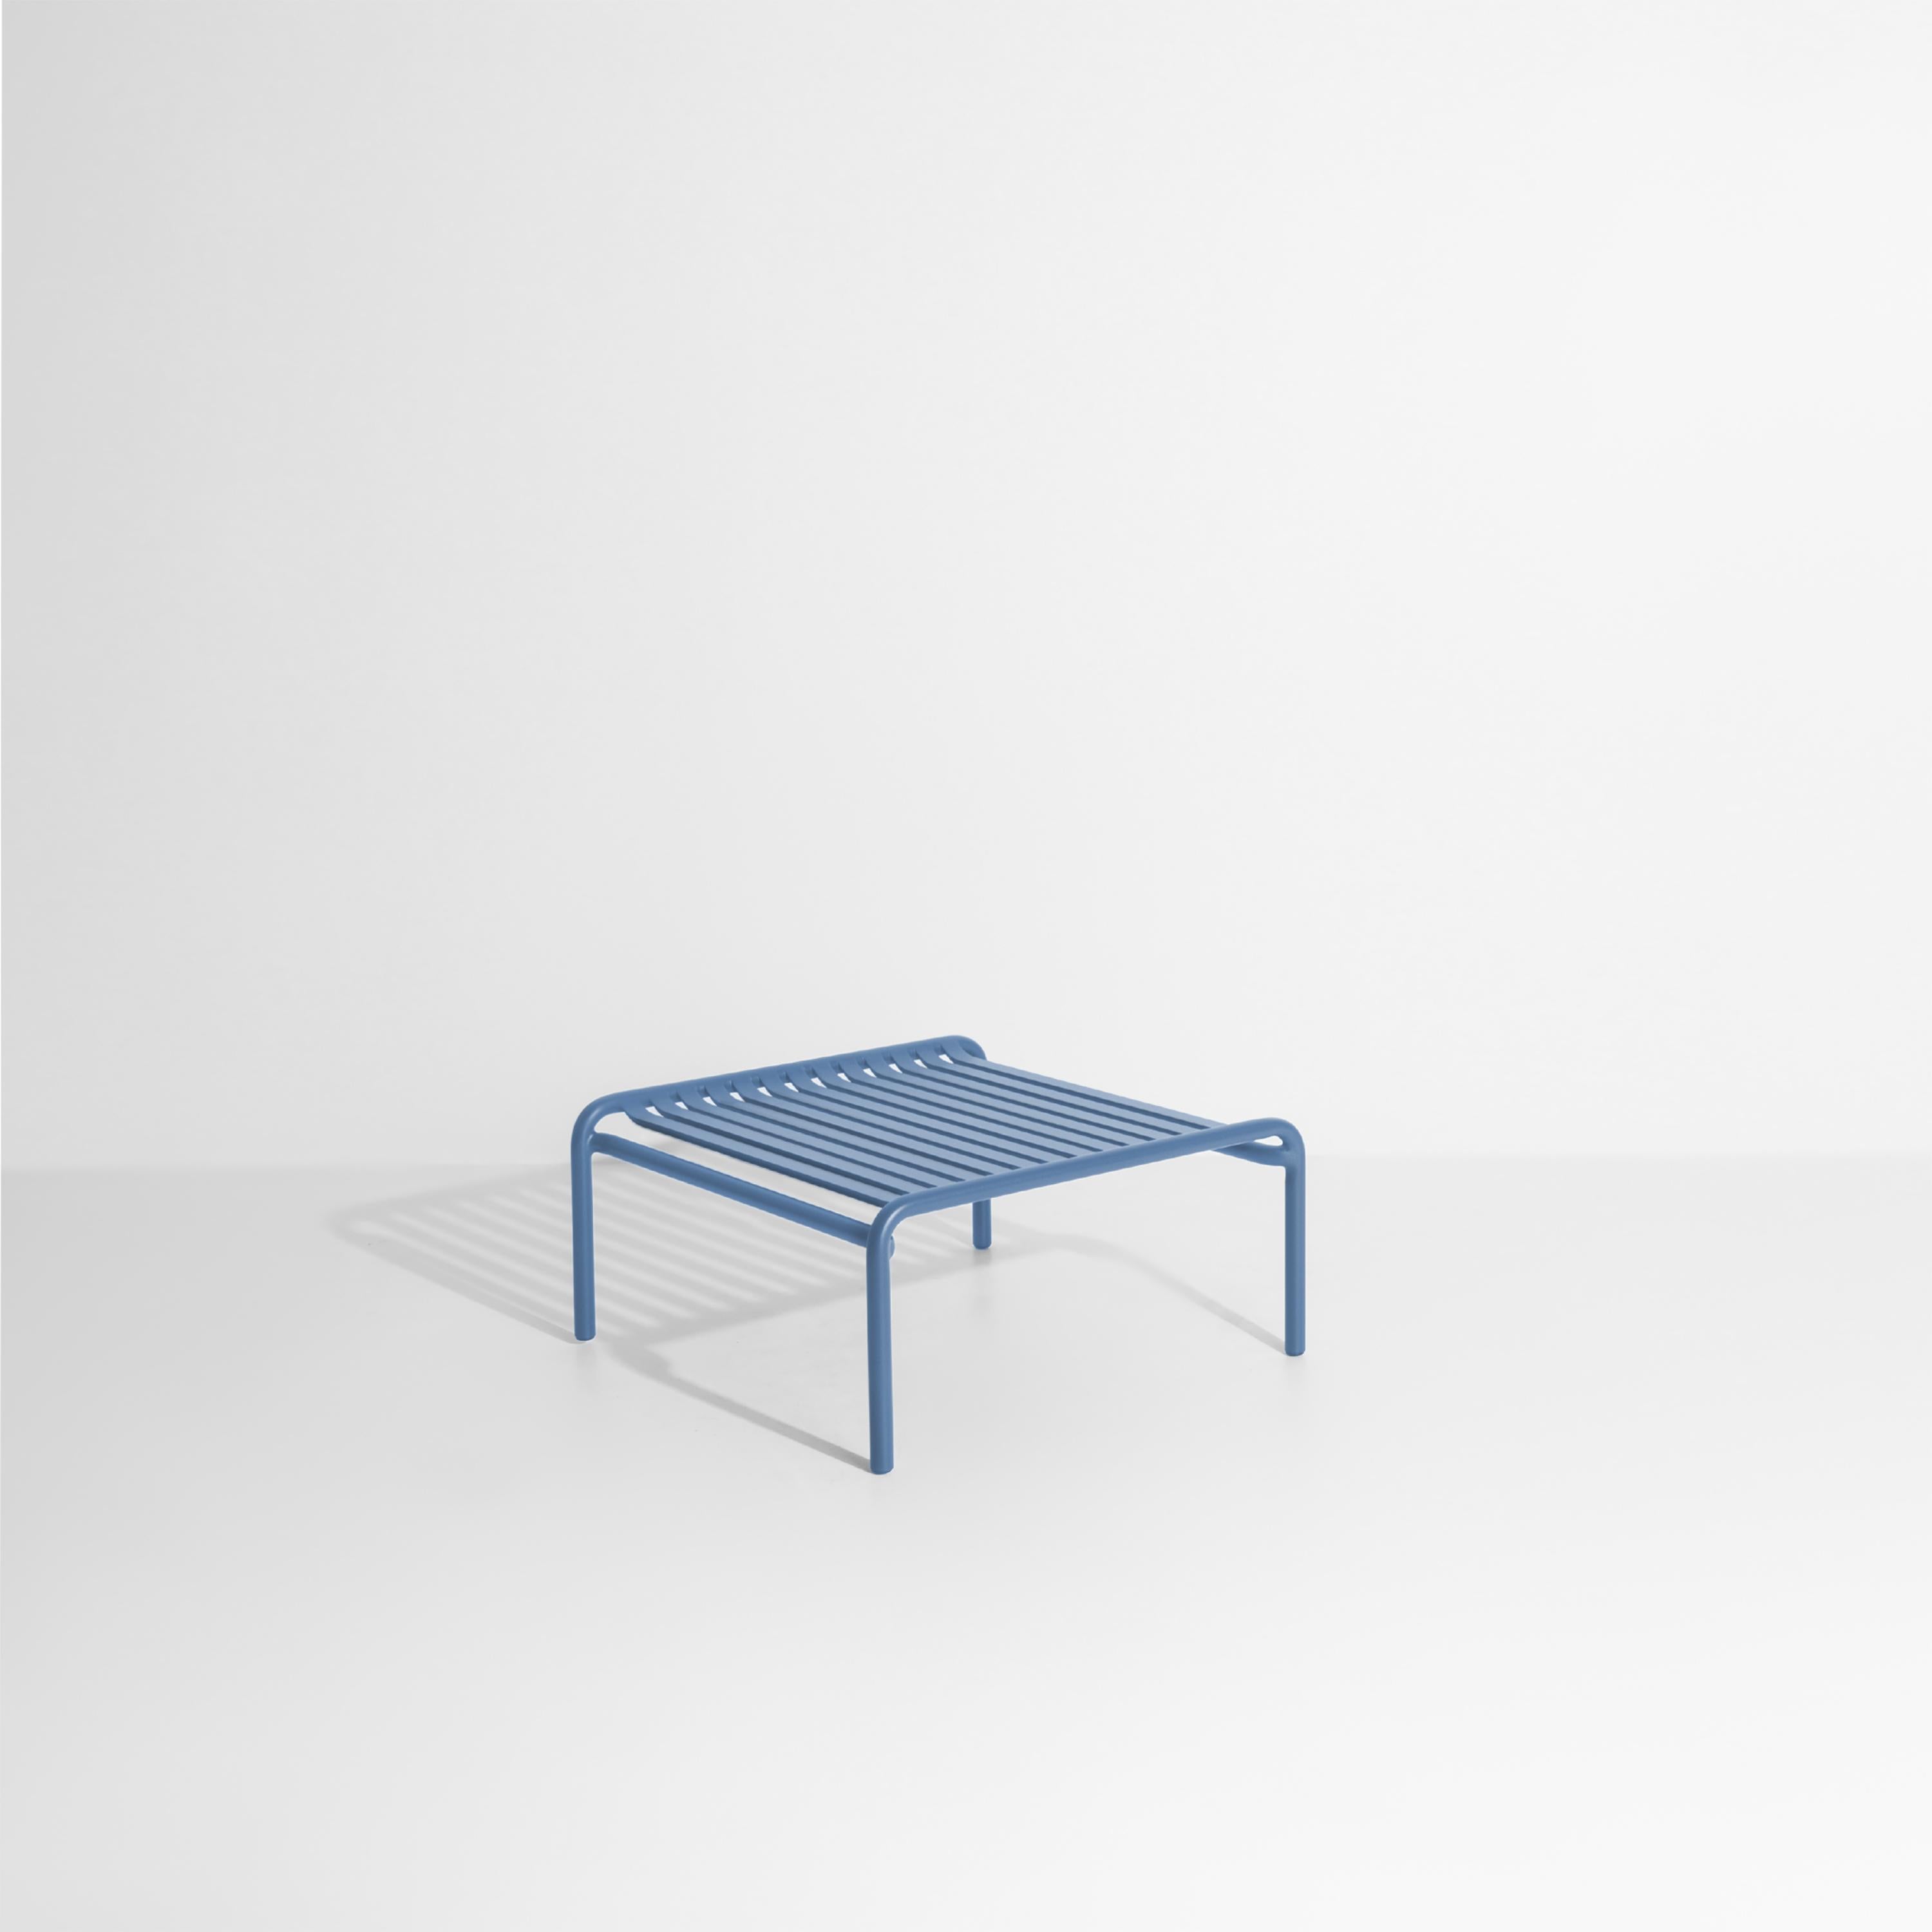 Petite Friture Week-End Coffee Table in Azur Blue Aluminium by Studio BrichetZiegler, 2017

The week-end collection is a full range of outdoor furniture, in aluminium grained epoxy paint, matt finish, that includes 18 functions and 8 colours for